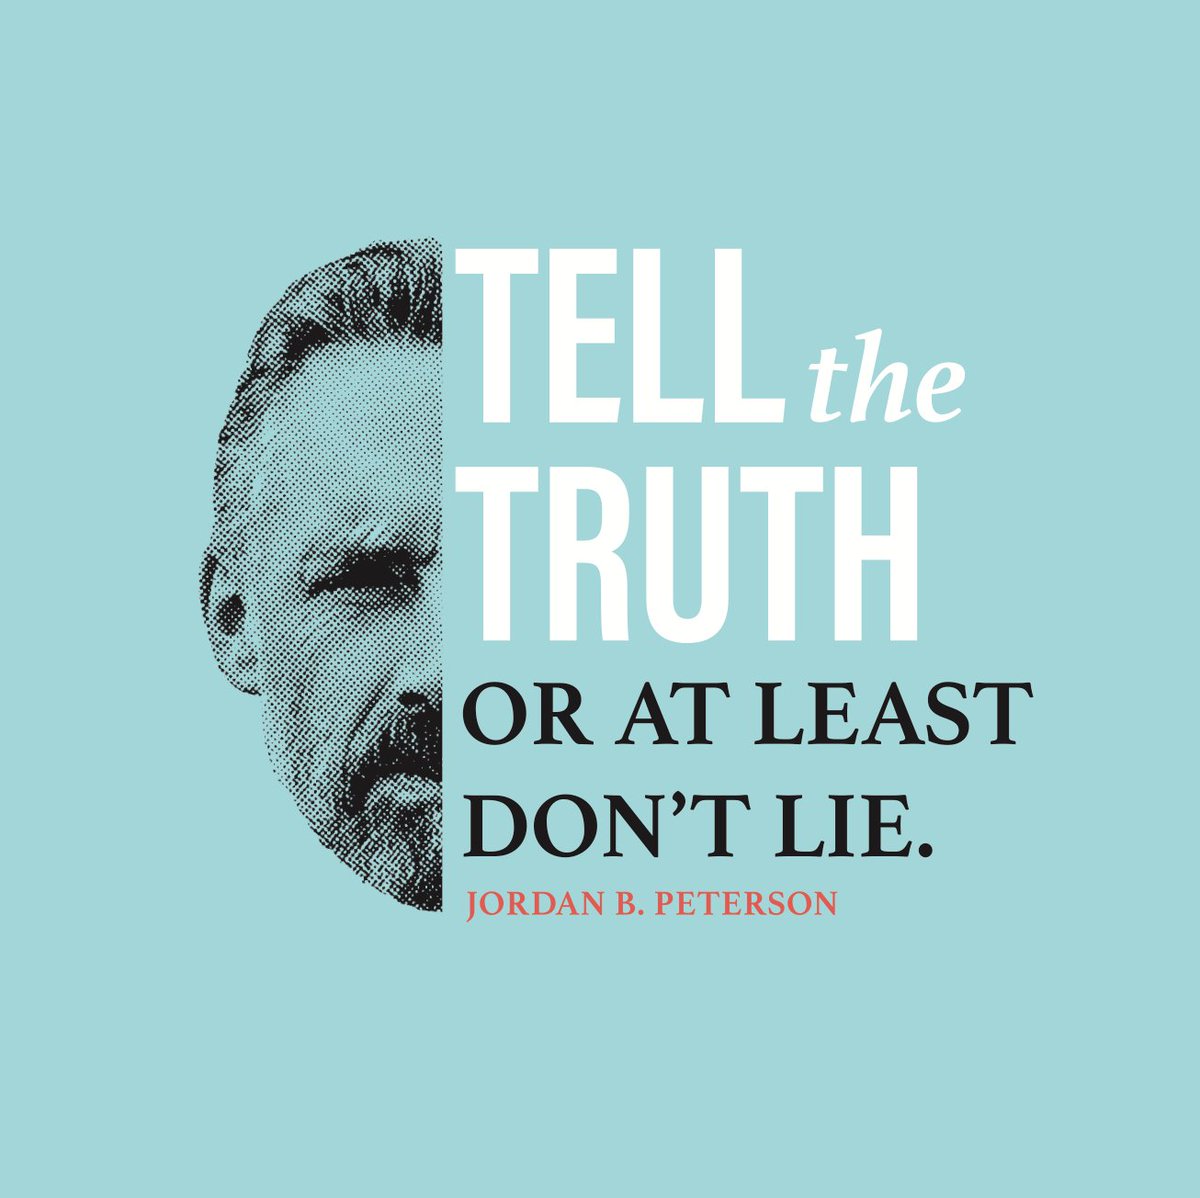 kryds Niende Revision Dr Jordan B Peterson on Twitter: "6/6 - Tell the truth - or, at least,  don't lie. https://t.co/91QwbFyNrX" / Twitter